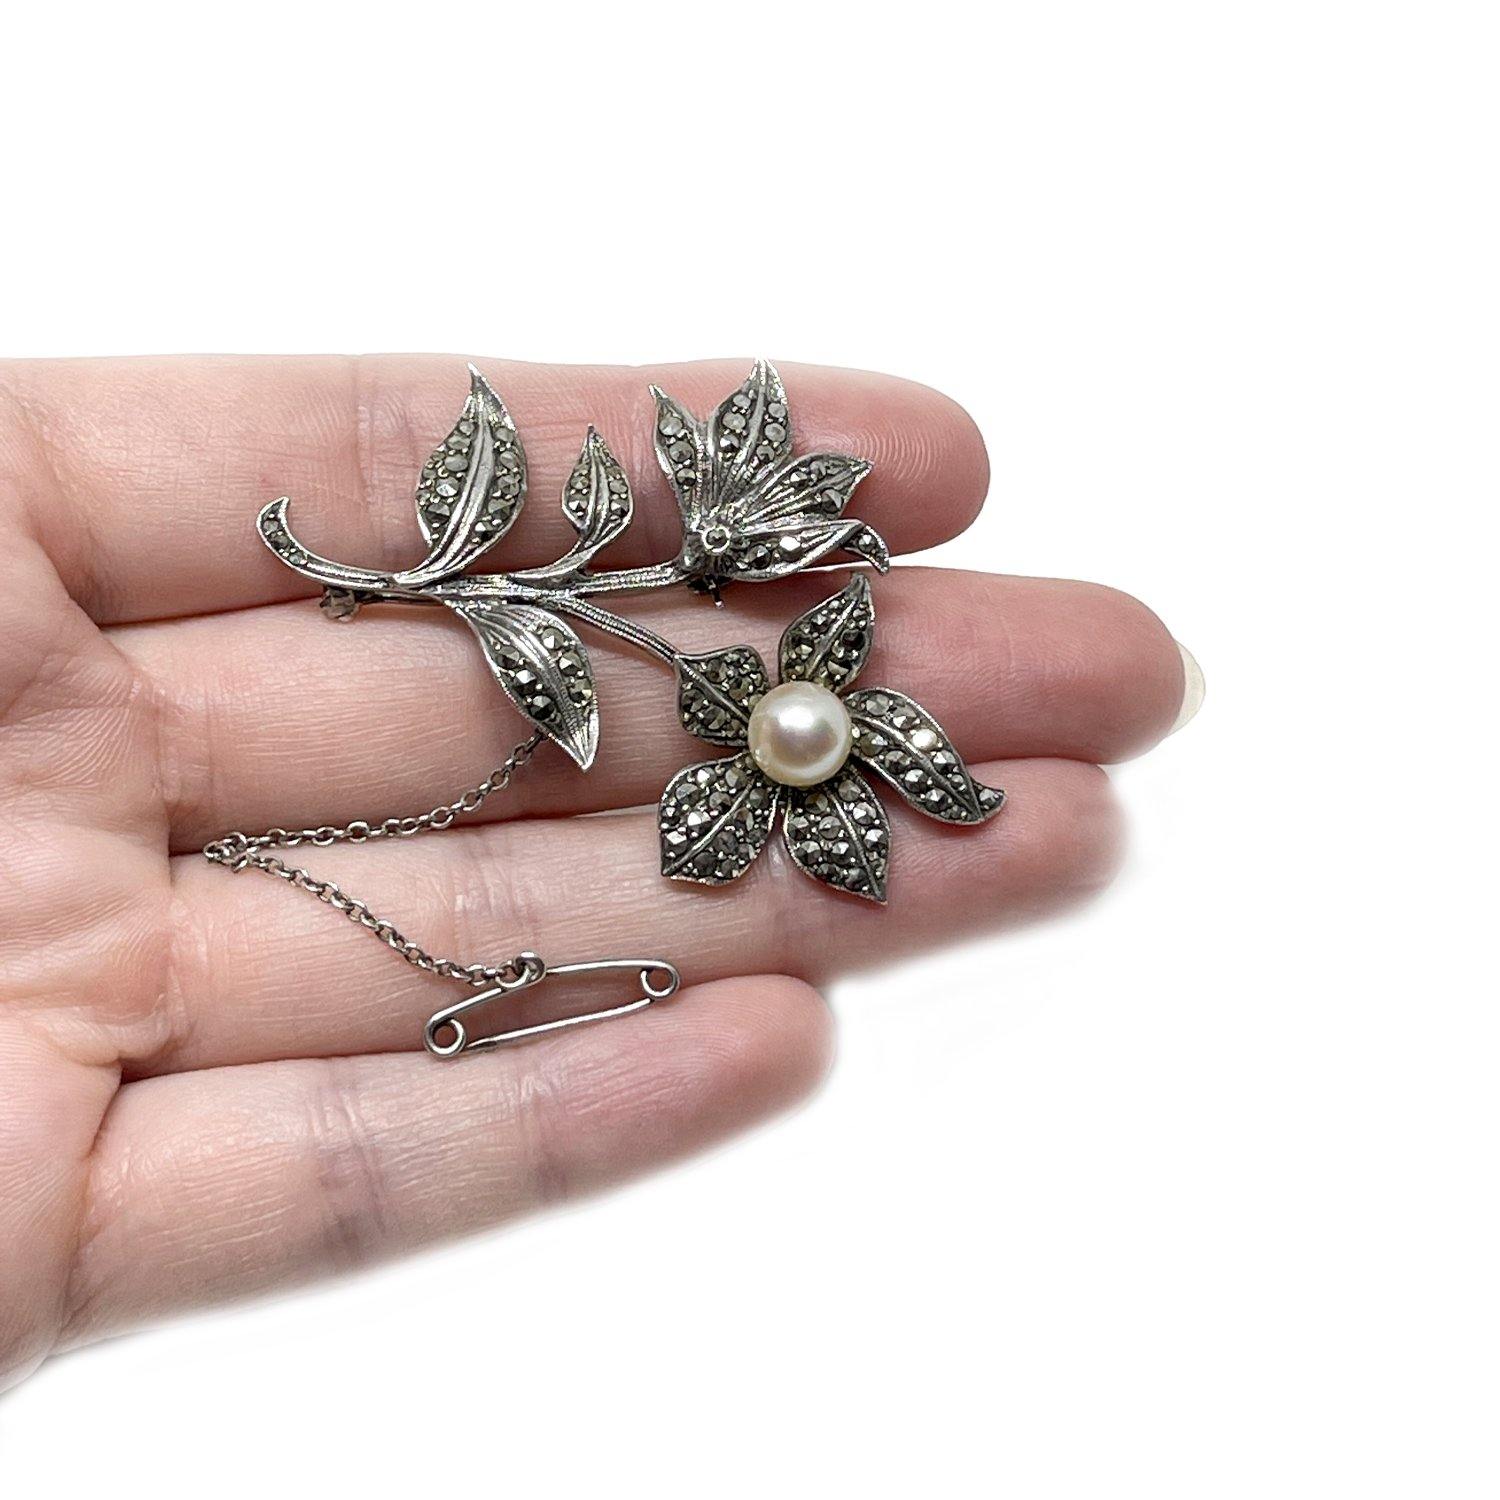 Marcasite Branch Japanese Akoya Cultured Saltwater Pearl Floral Brooch- Sterling Silver